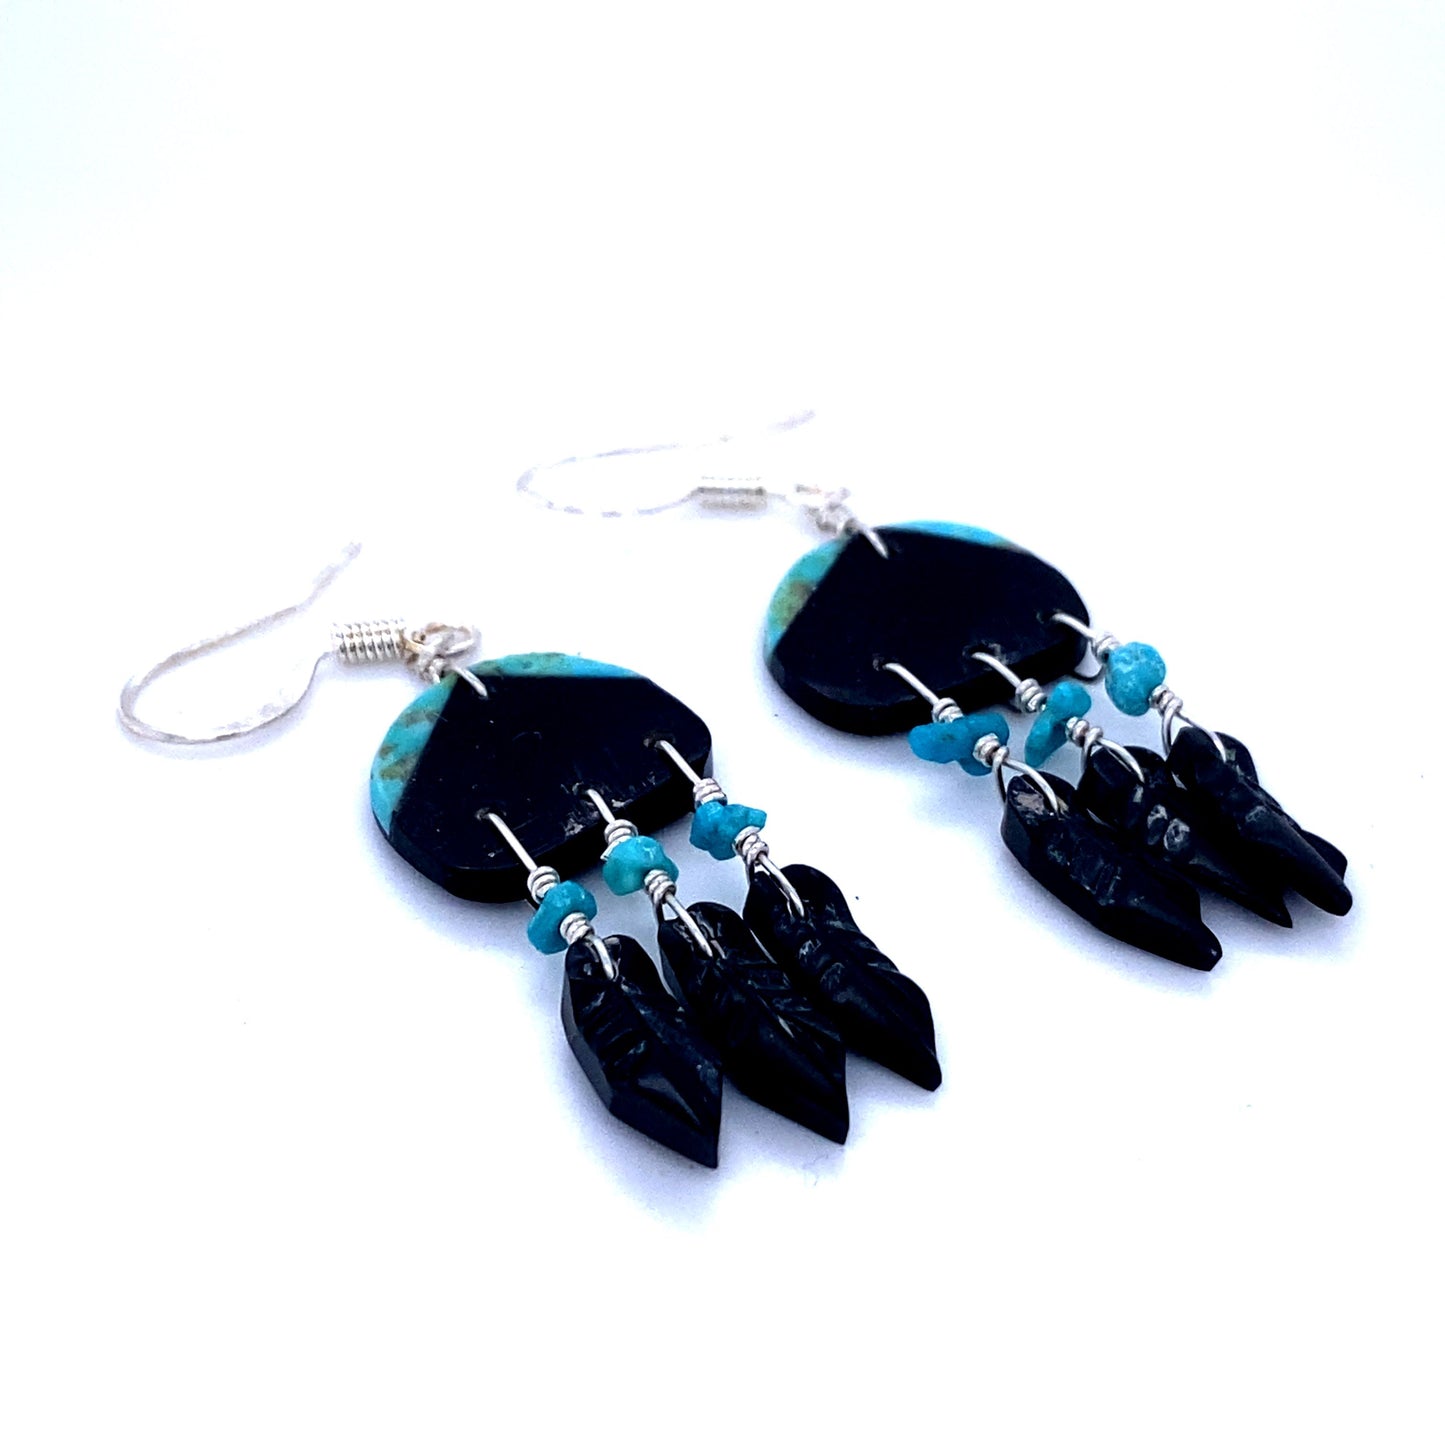 
                  
                    A pair of Super Silver Handmade Earrings with 3 Small Stone Feathers inspired by Native American culture, featuring black and turquoise beads handcrafted by artisans.
                  
                